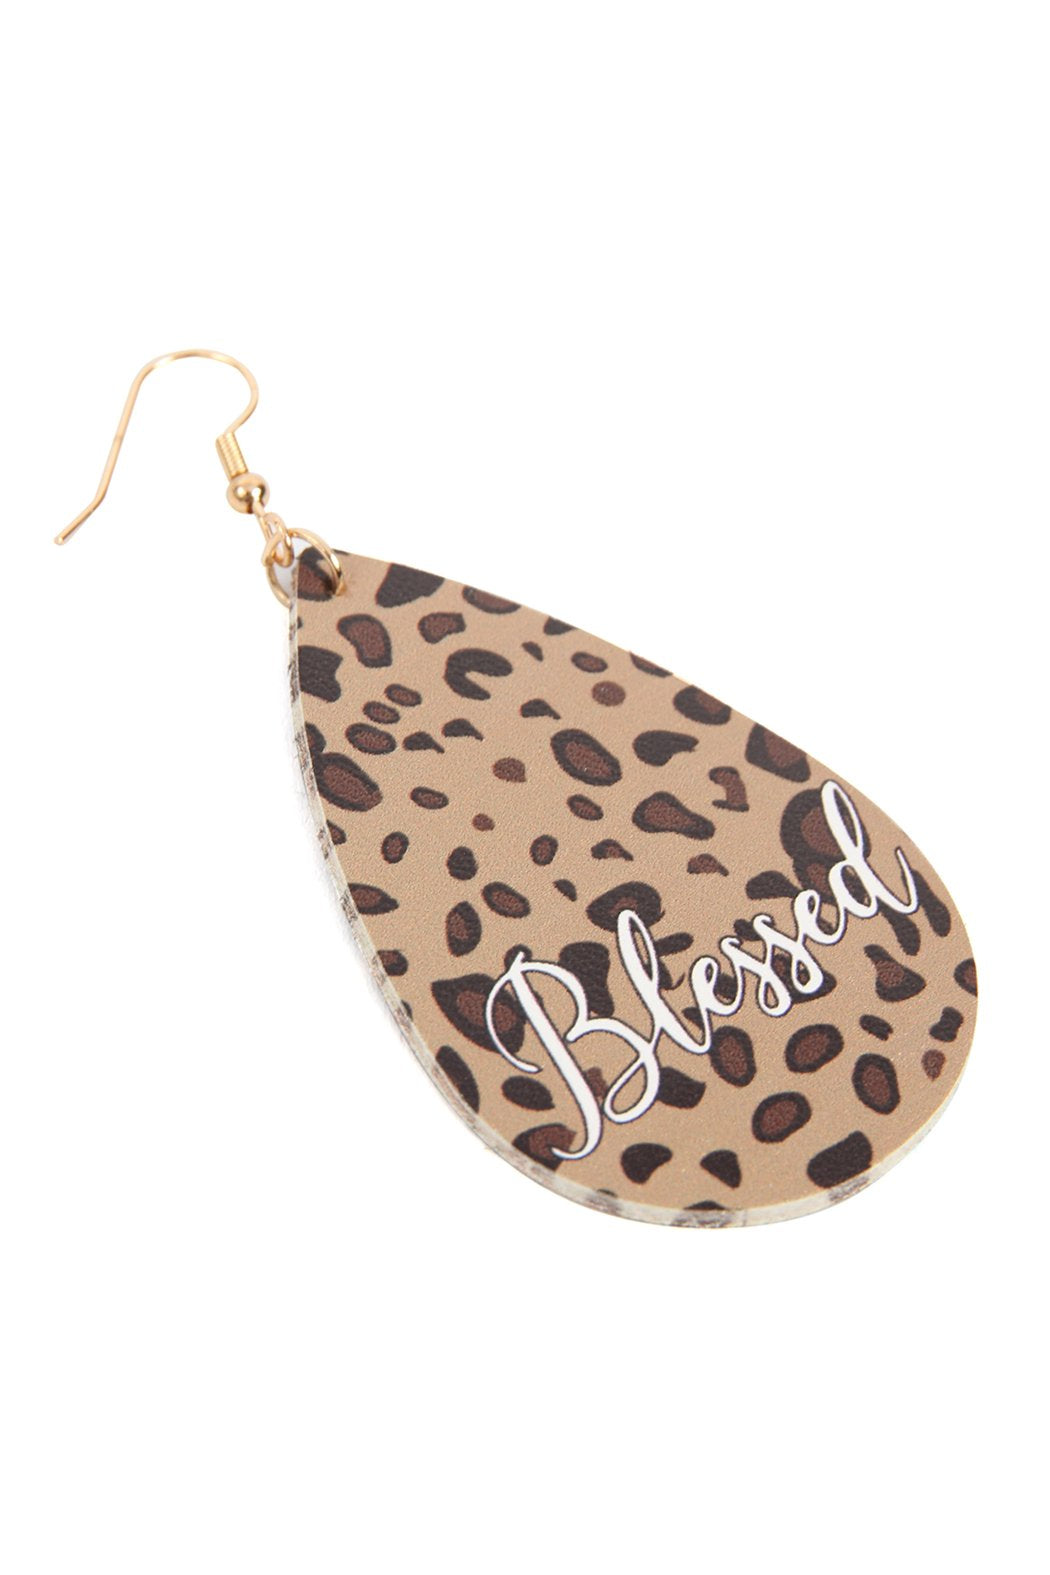 Hde2867 - "Blessed" Animal Print Leather Fish Hook Earrings